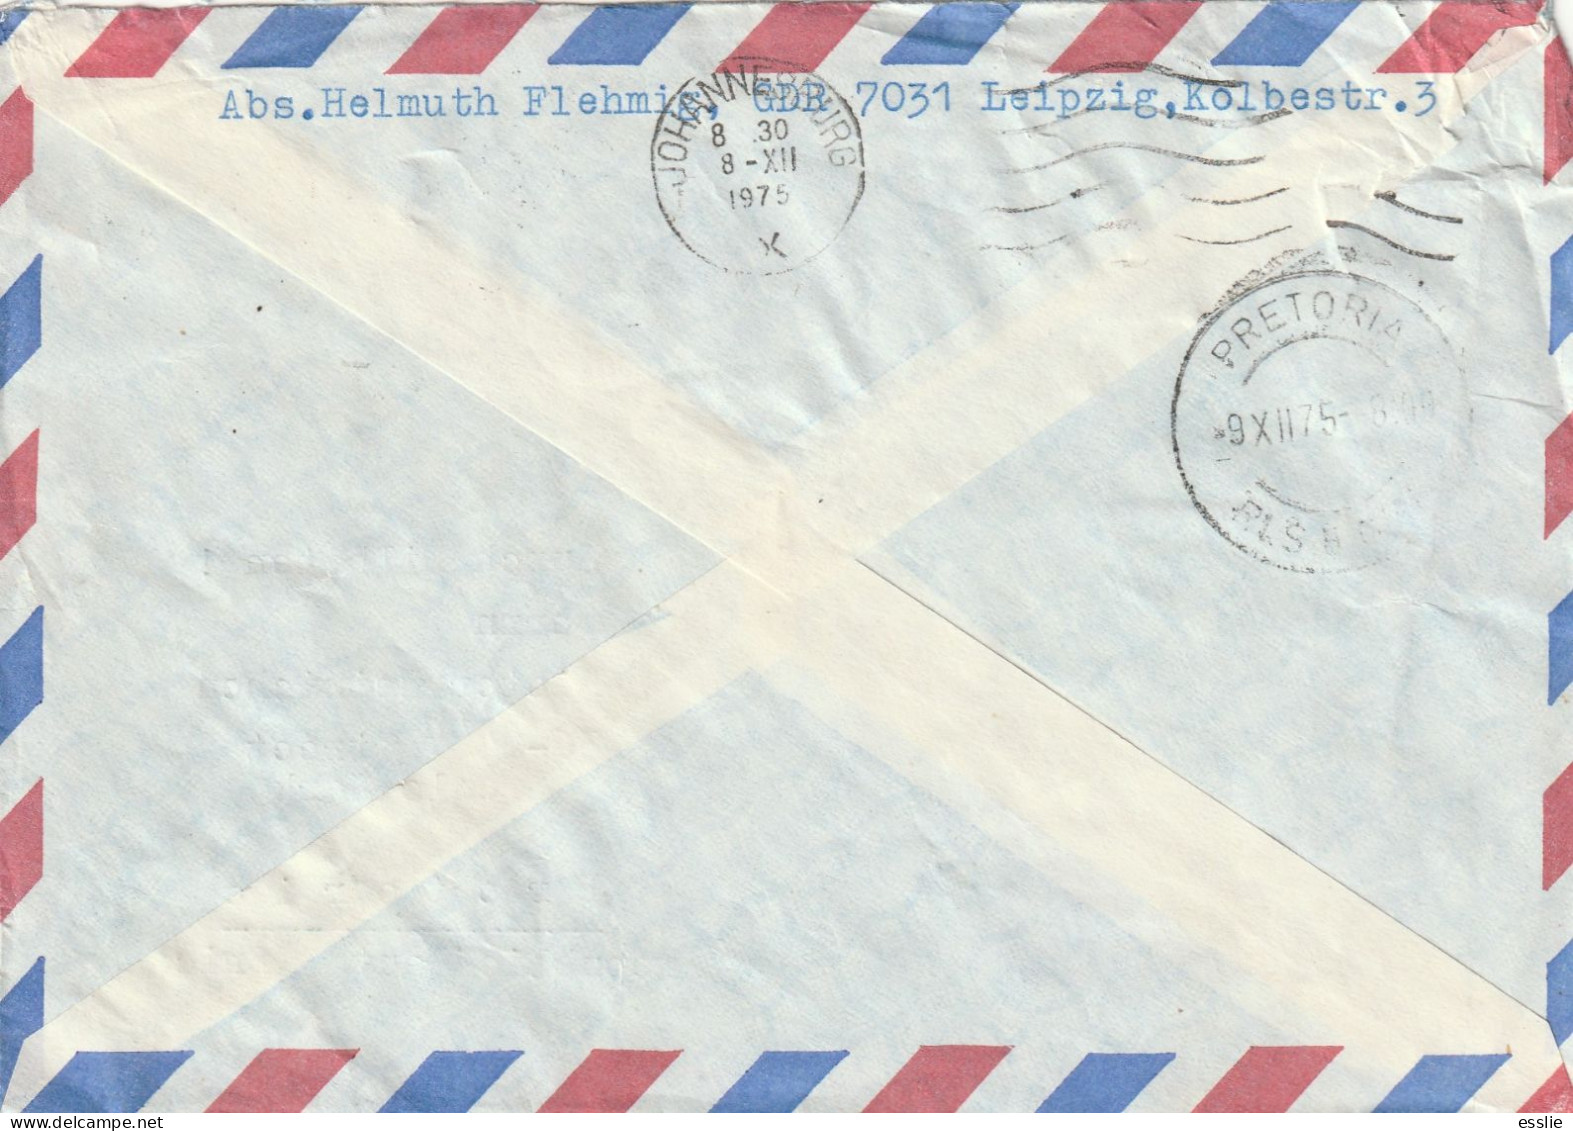 Germany DDR Eilsendung Express Cover - 1974 1973 - Kirchhoff Fieldball United Nations Oil Refinery Ryazan Soviet Science - Lettres & Documents